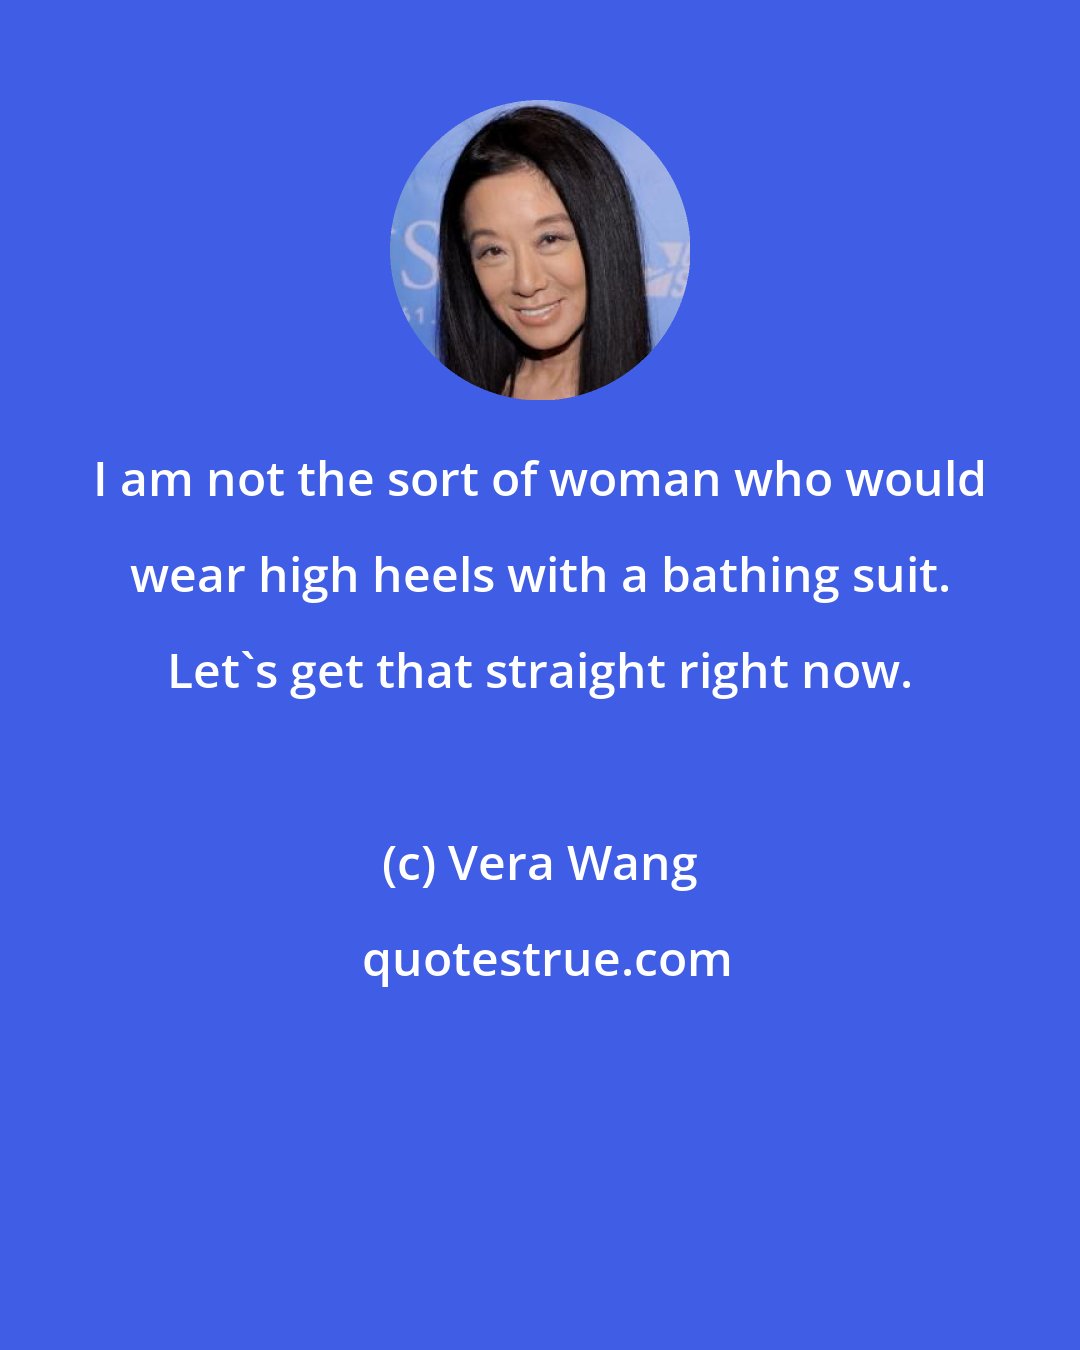 Vera Wang: I am not the sort of woman who would wear high heels with a bathing suit. Let's get that straight right now.